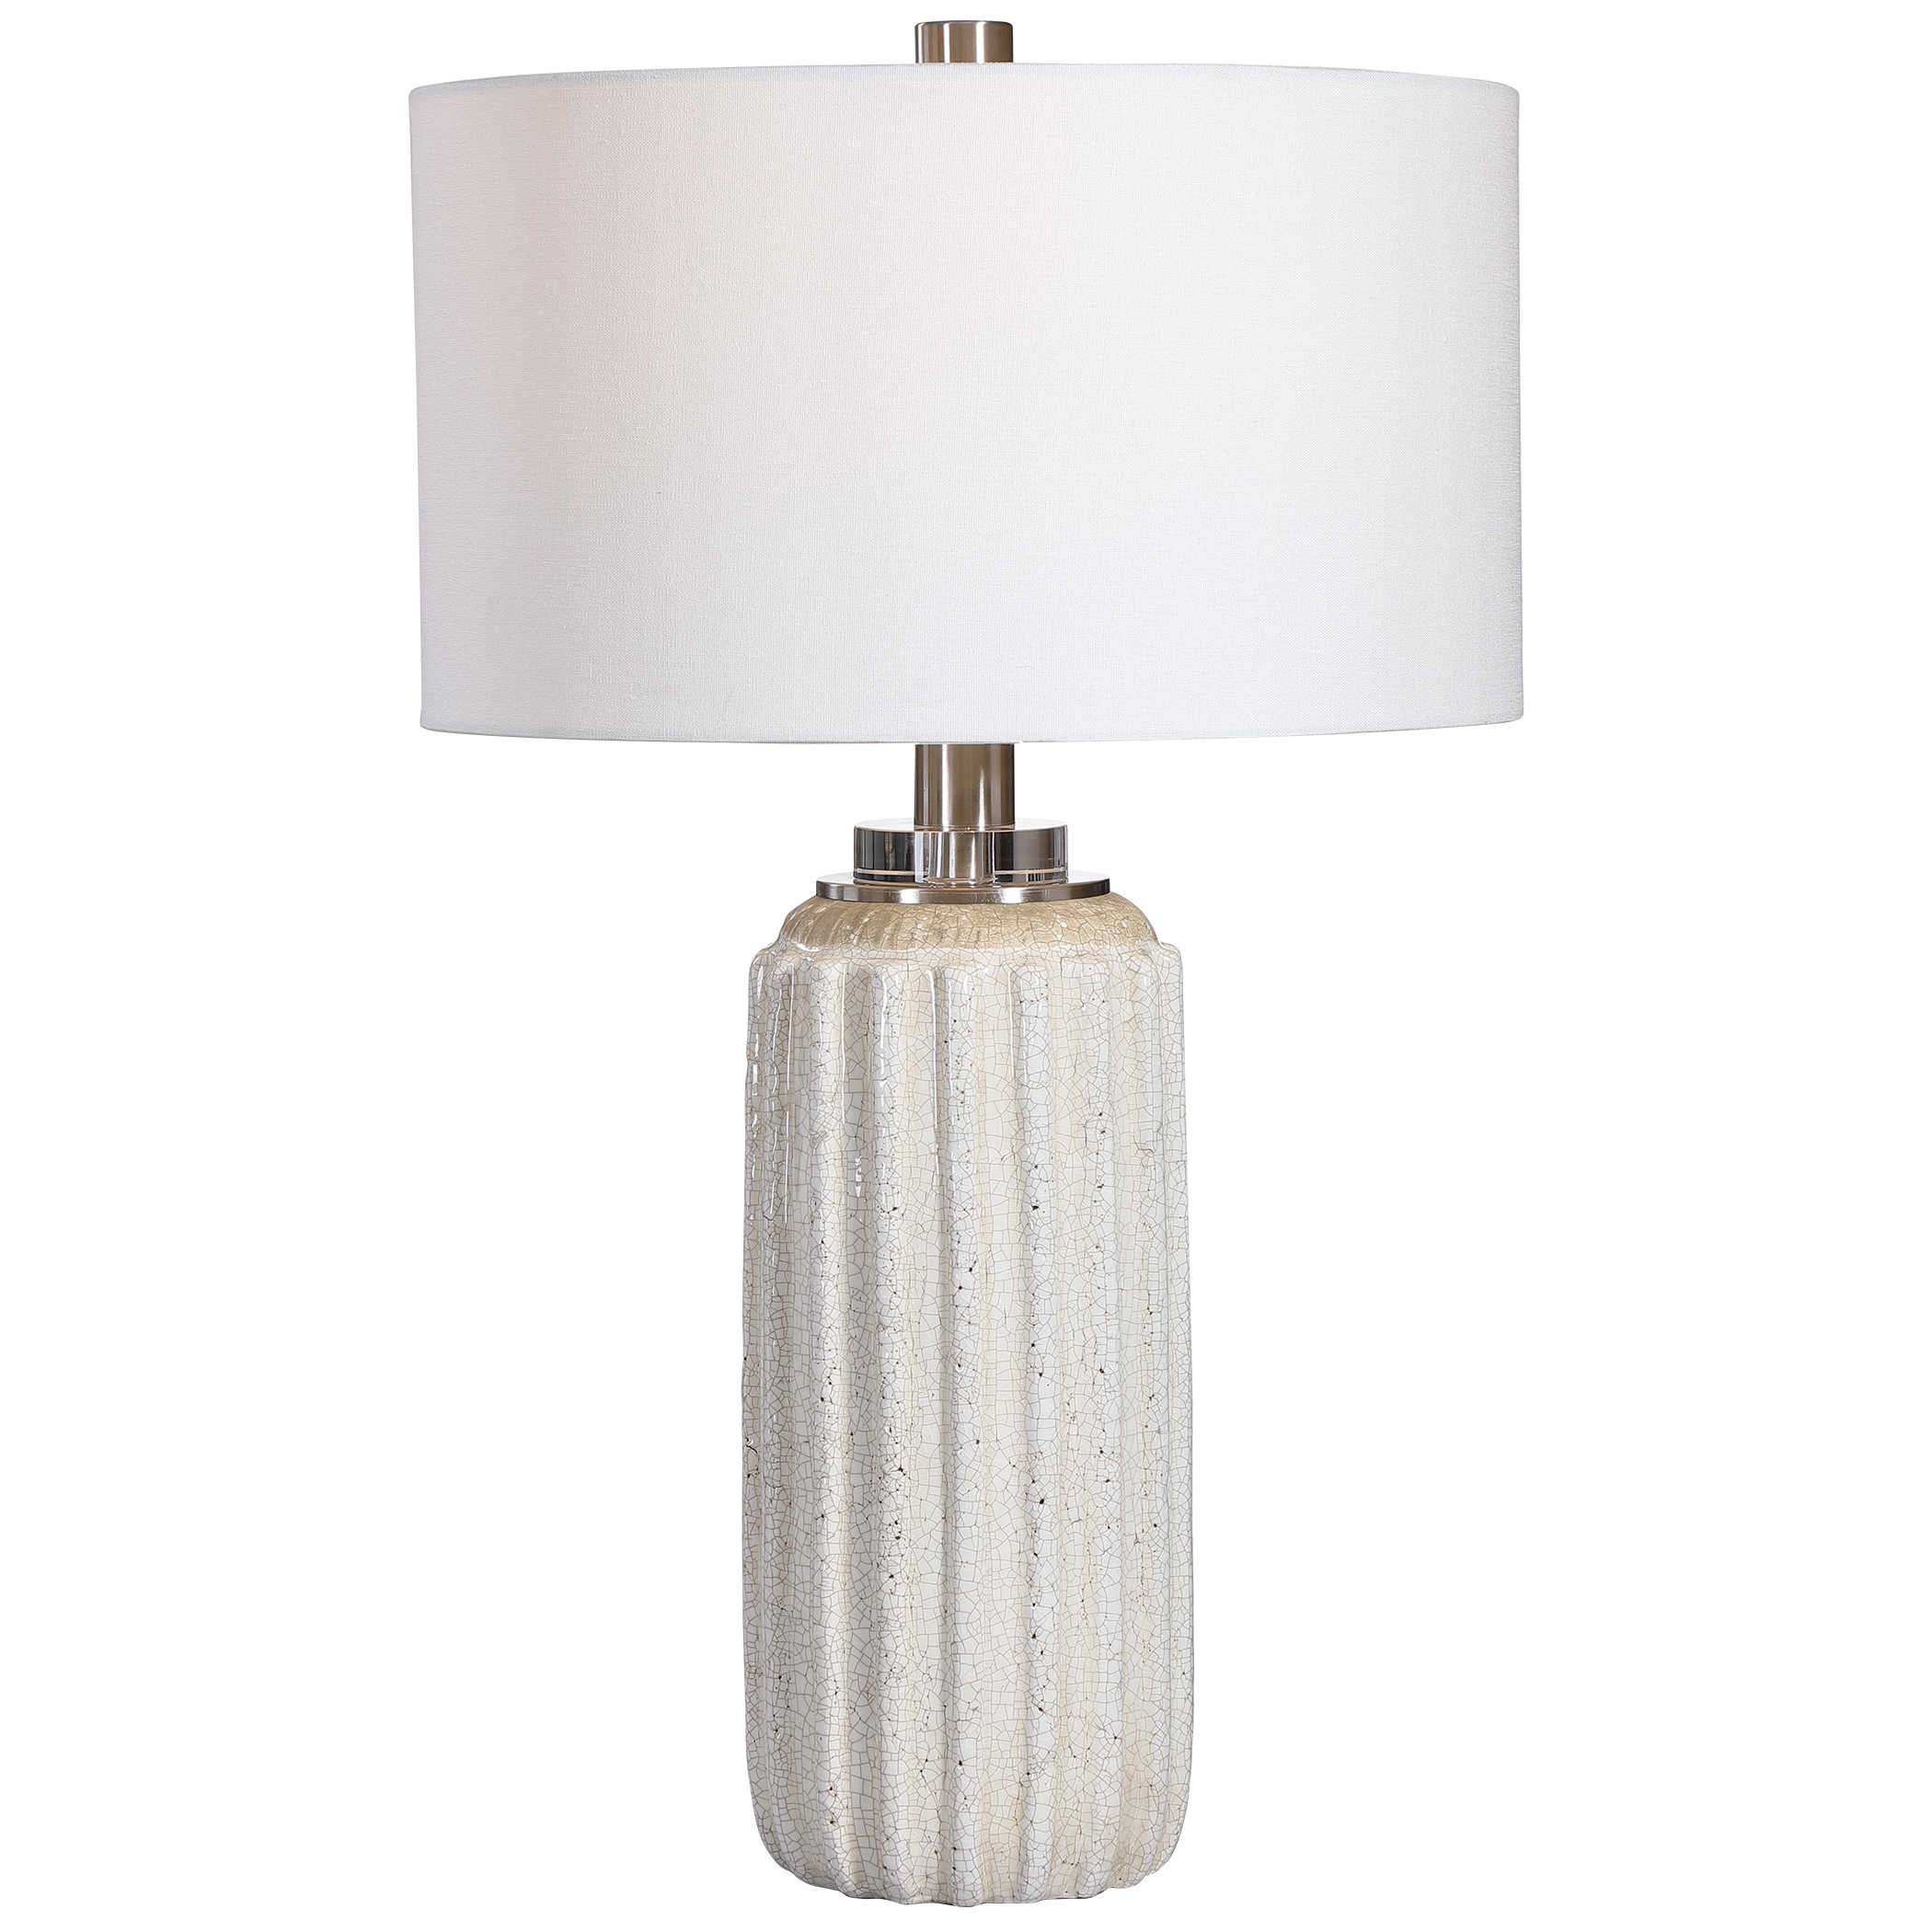 Azariah Crackle Table Lamp, White, 29" - Image 0